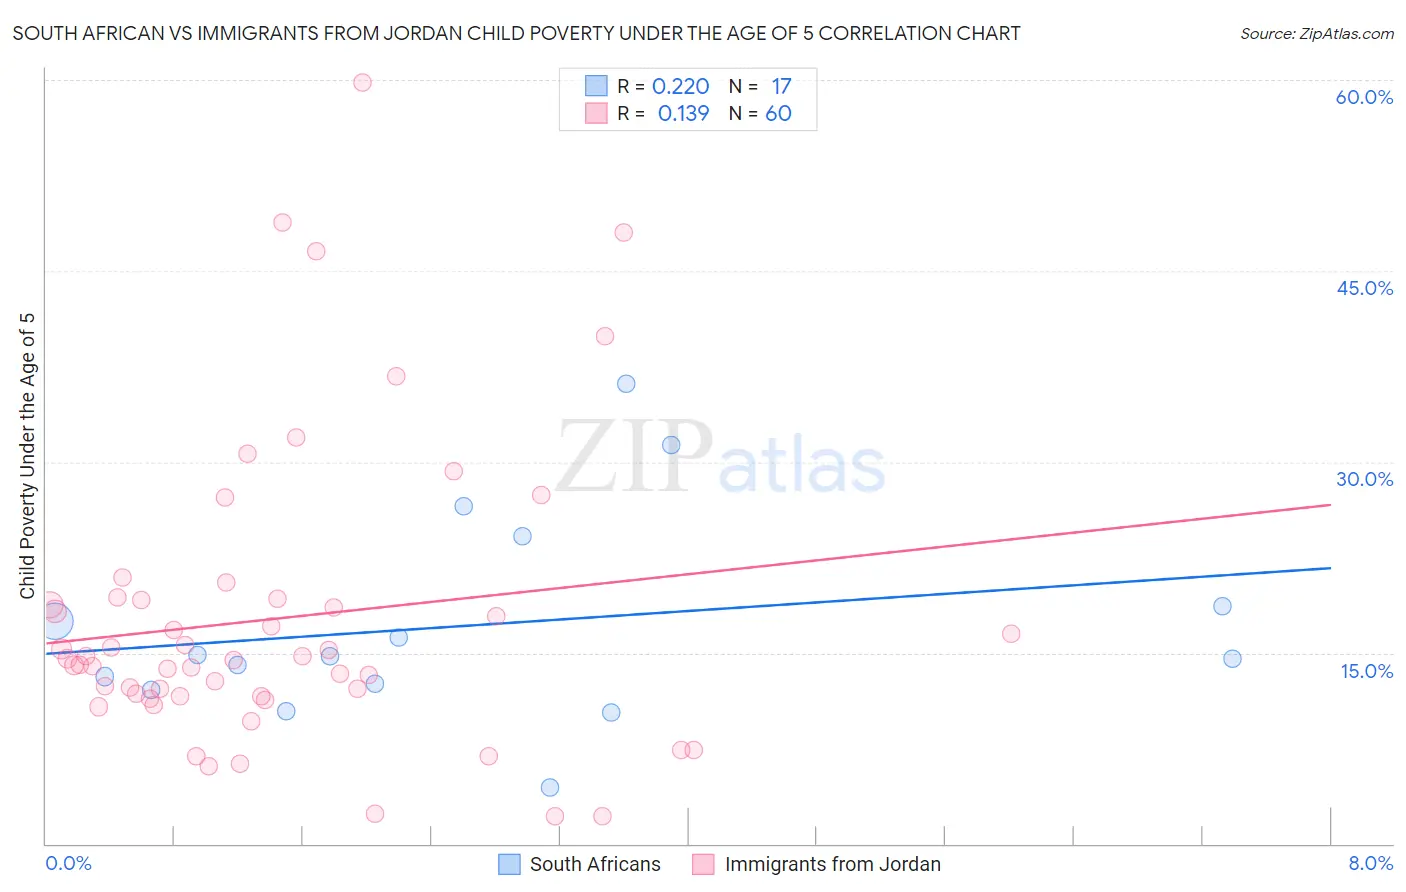 South African vs Immigrants from Jordan Child Poverty Under the Age of 5